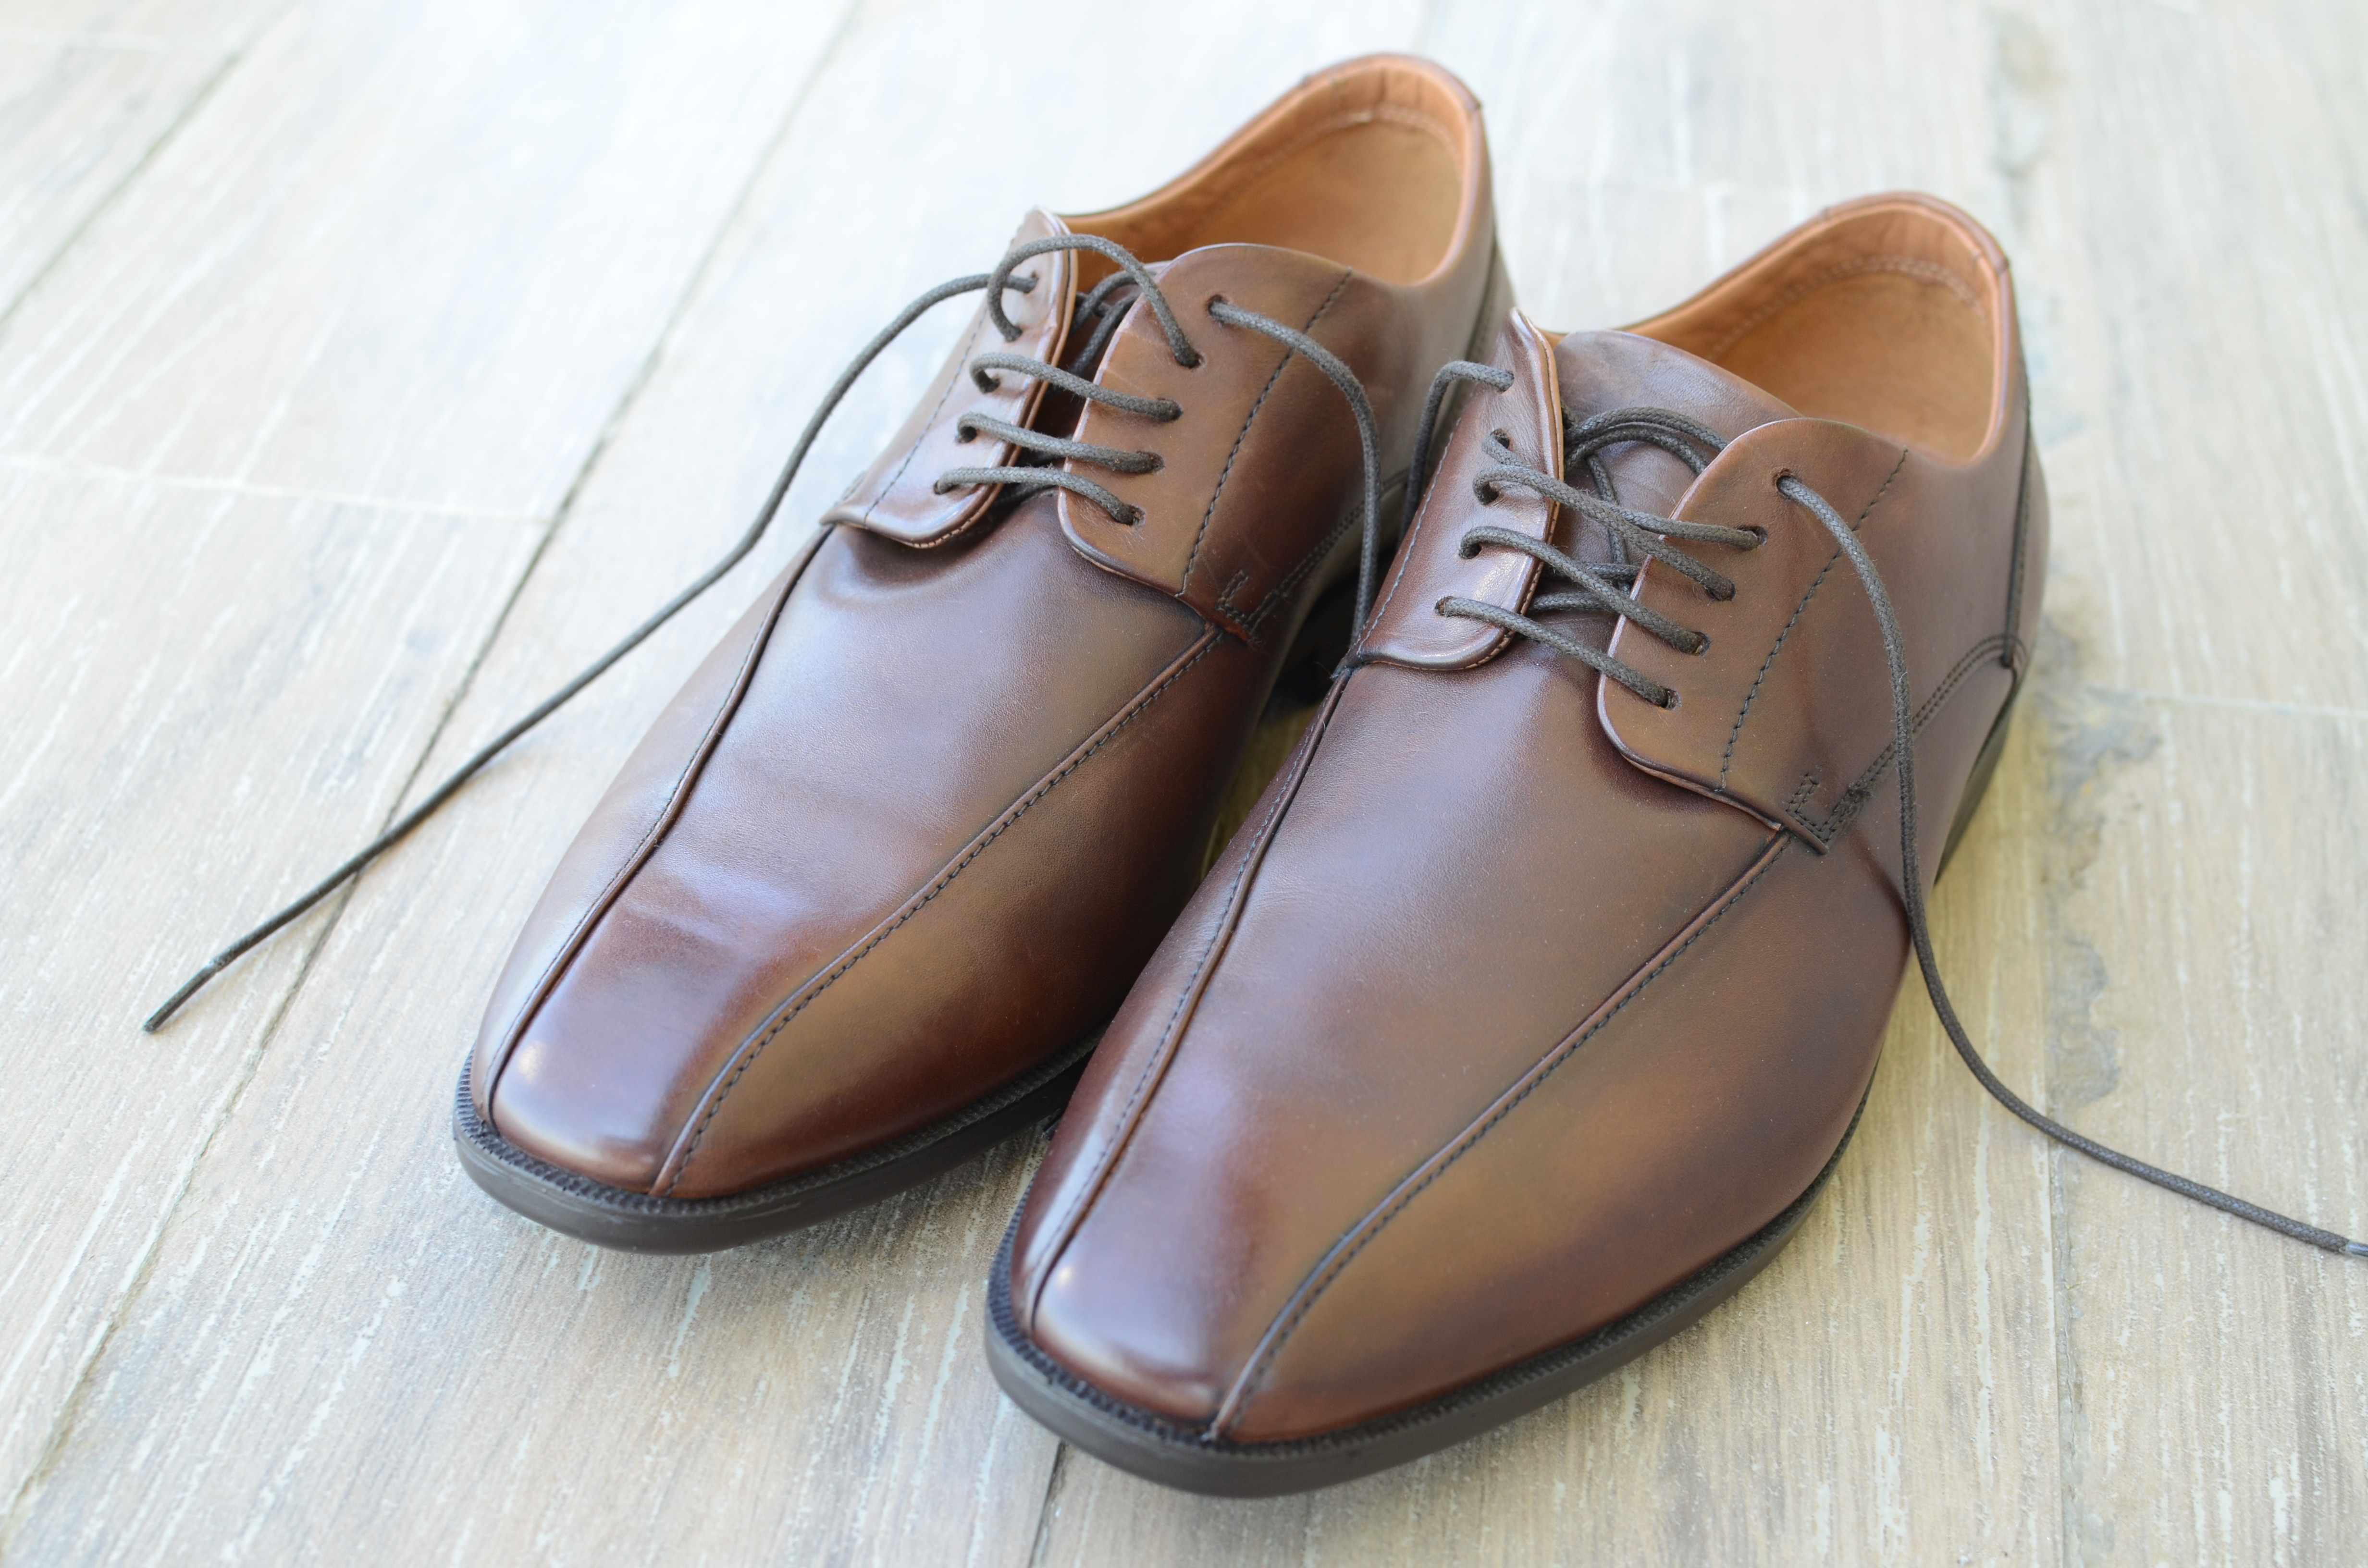 brown leather shoes on floor